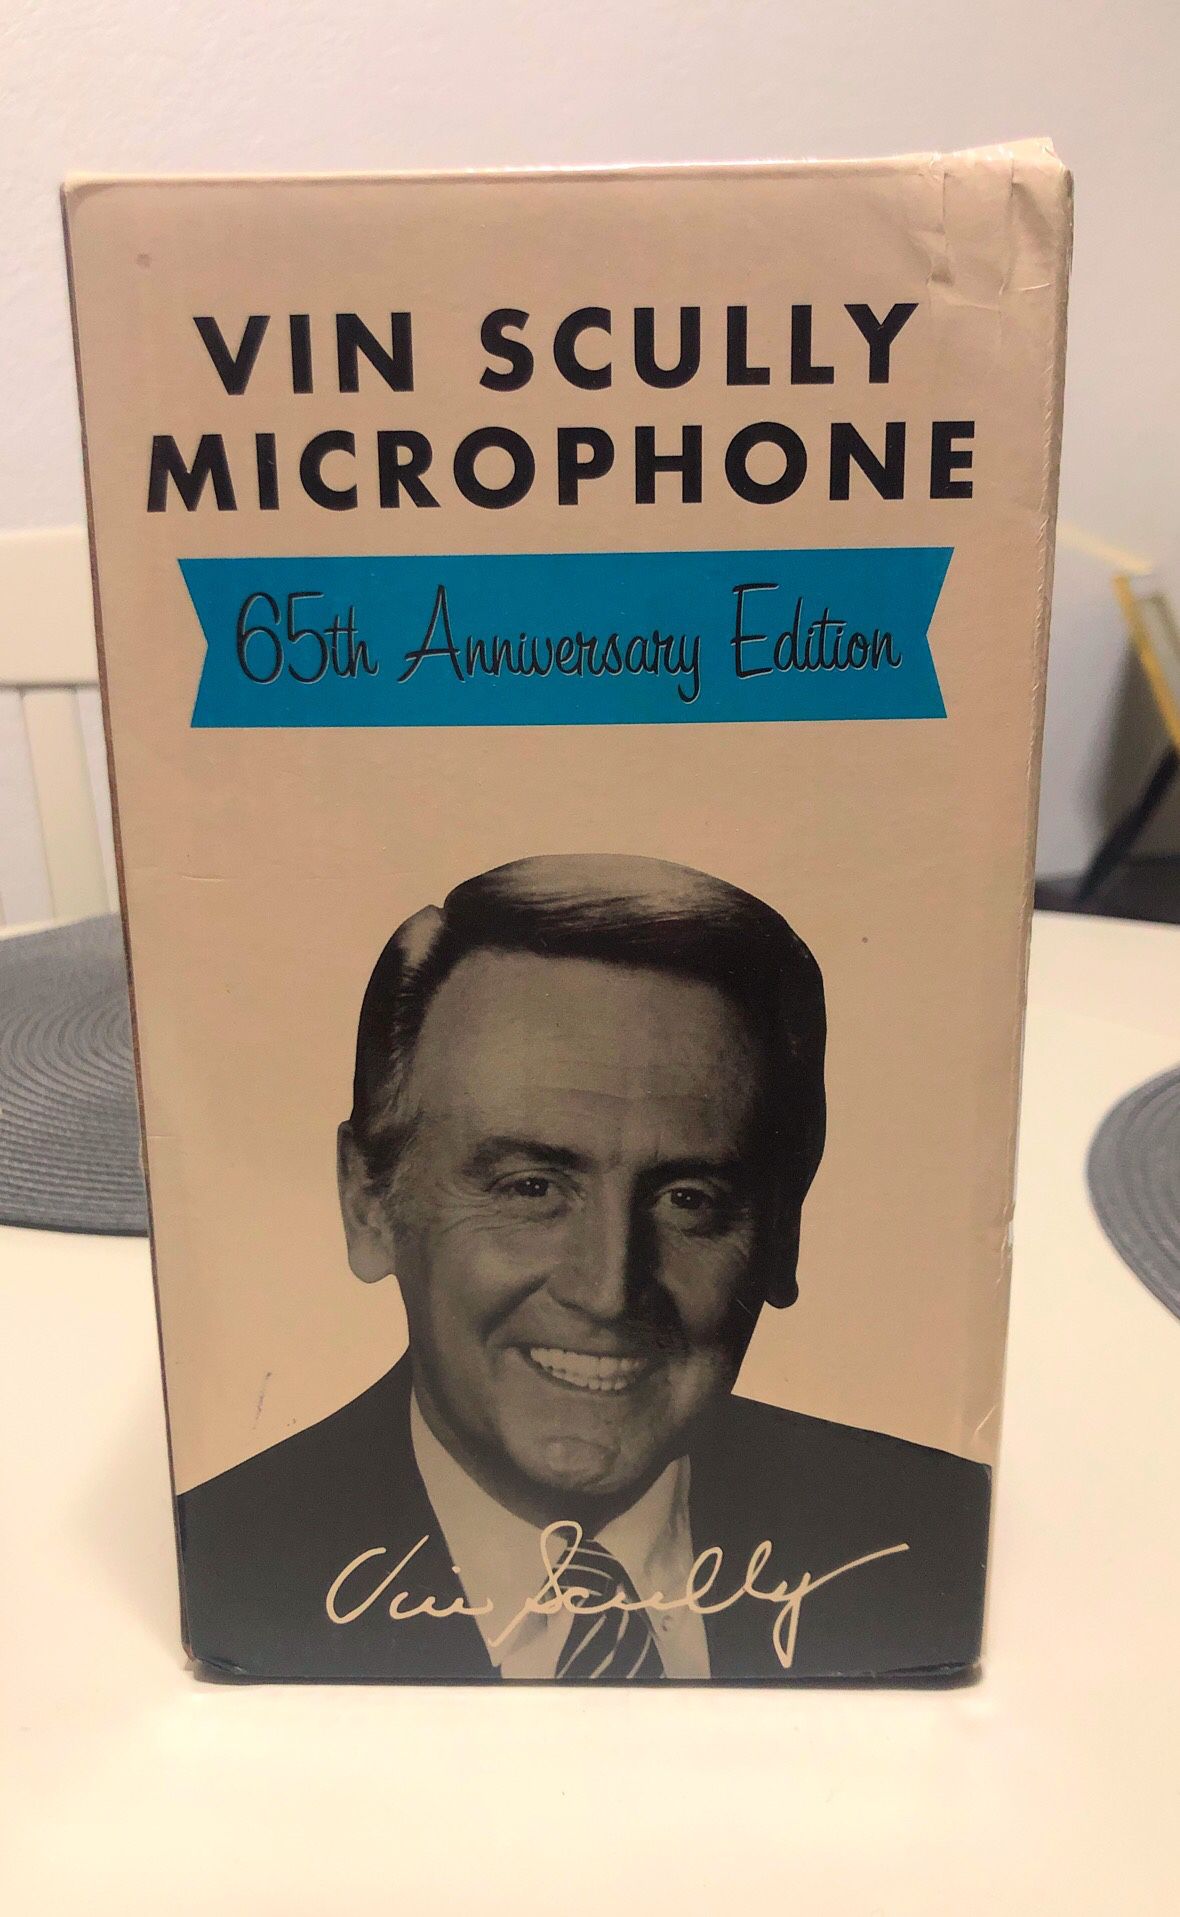 NEW!VIN SCULLY MICROPHONE 65TH ANNIVERSARY EDITION